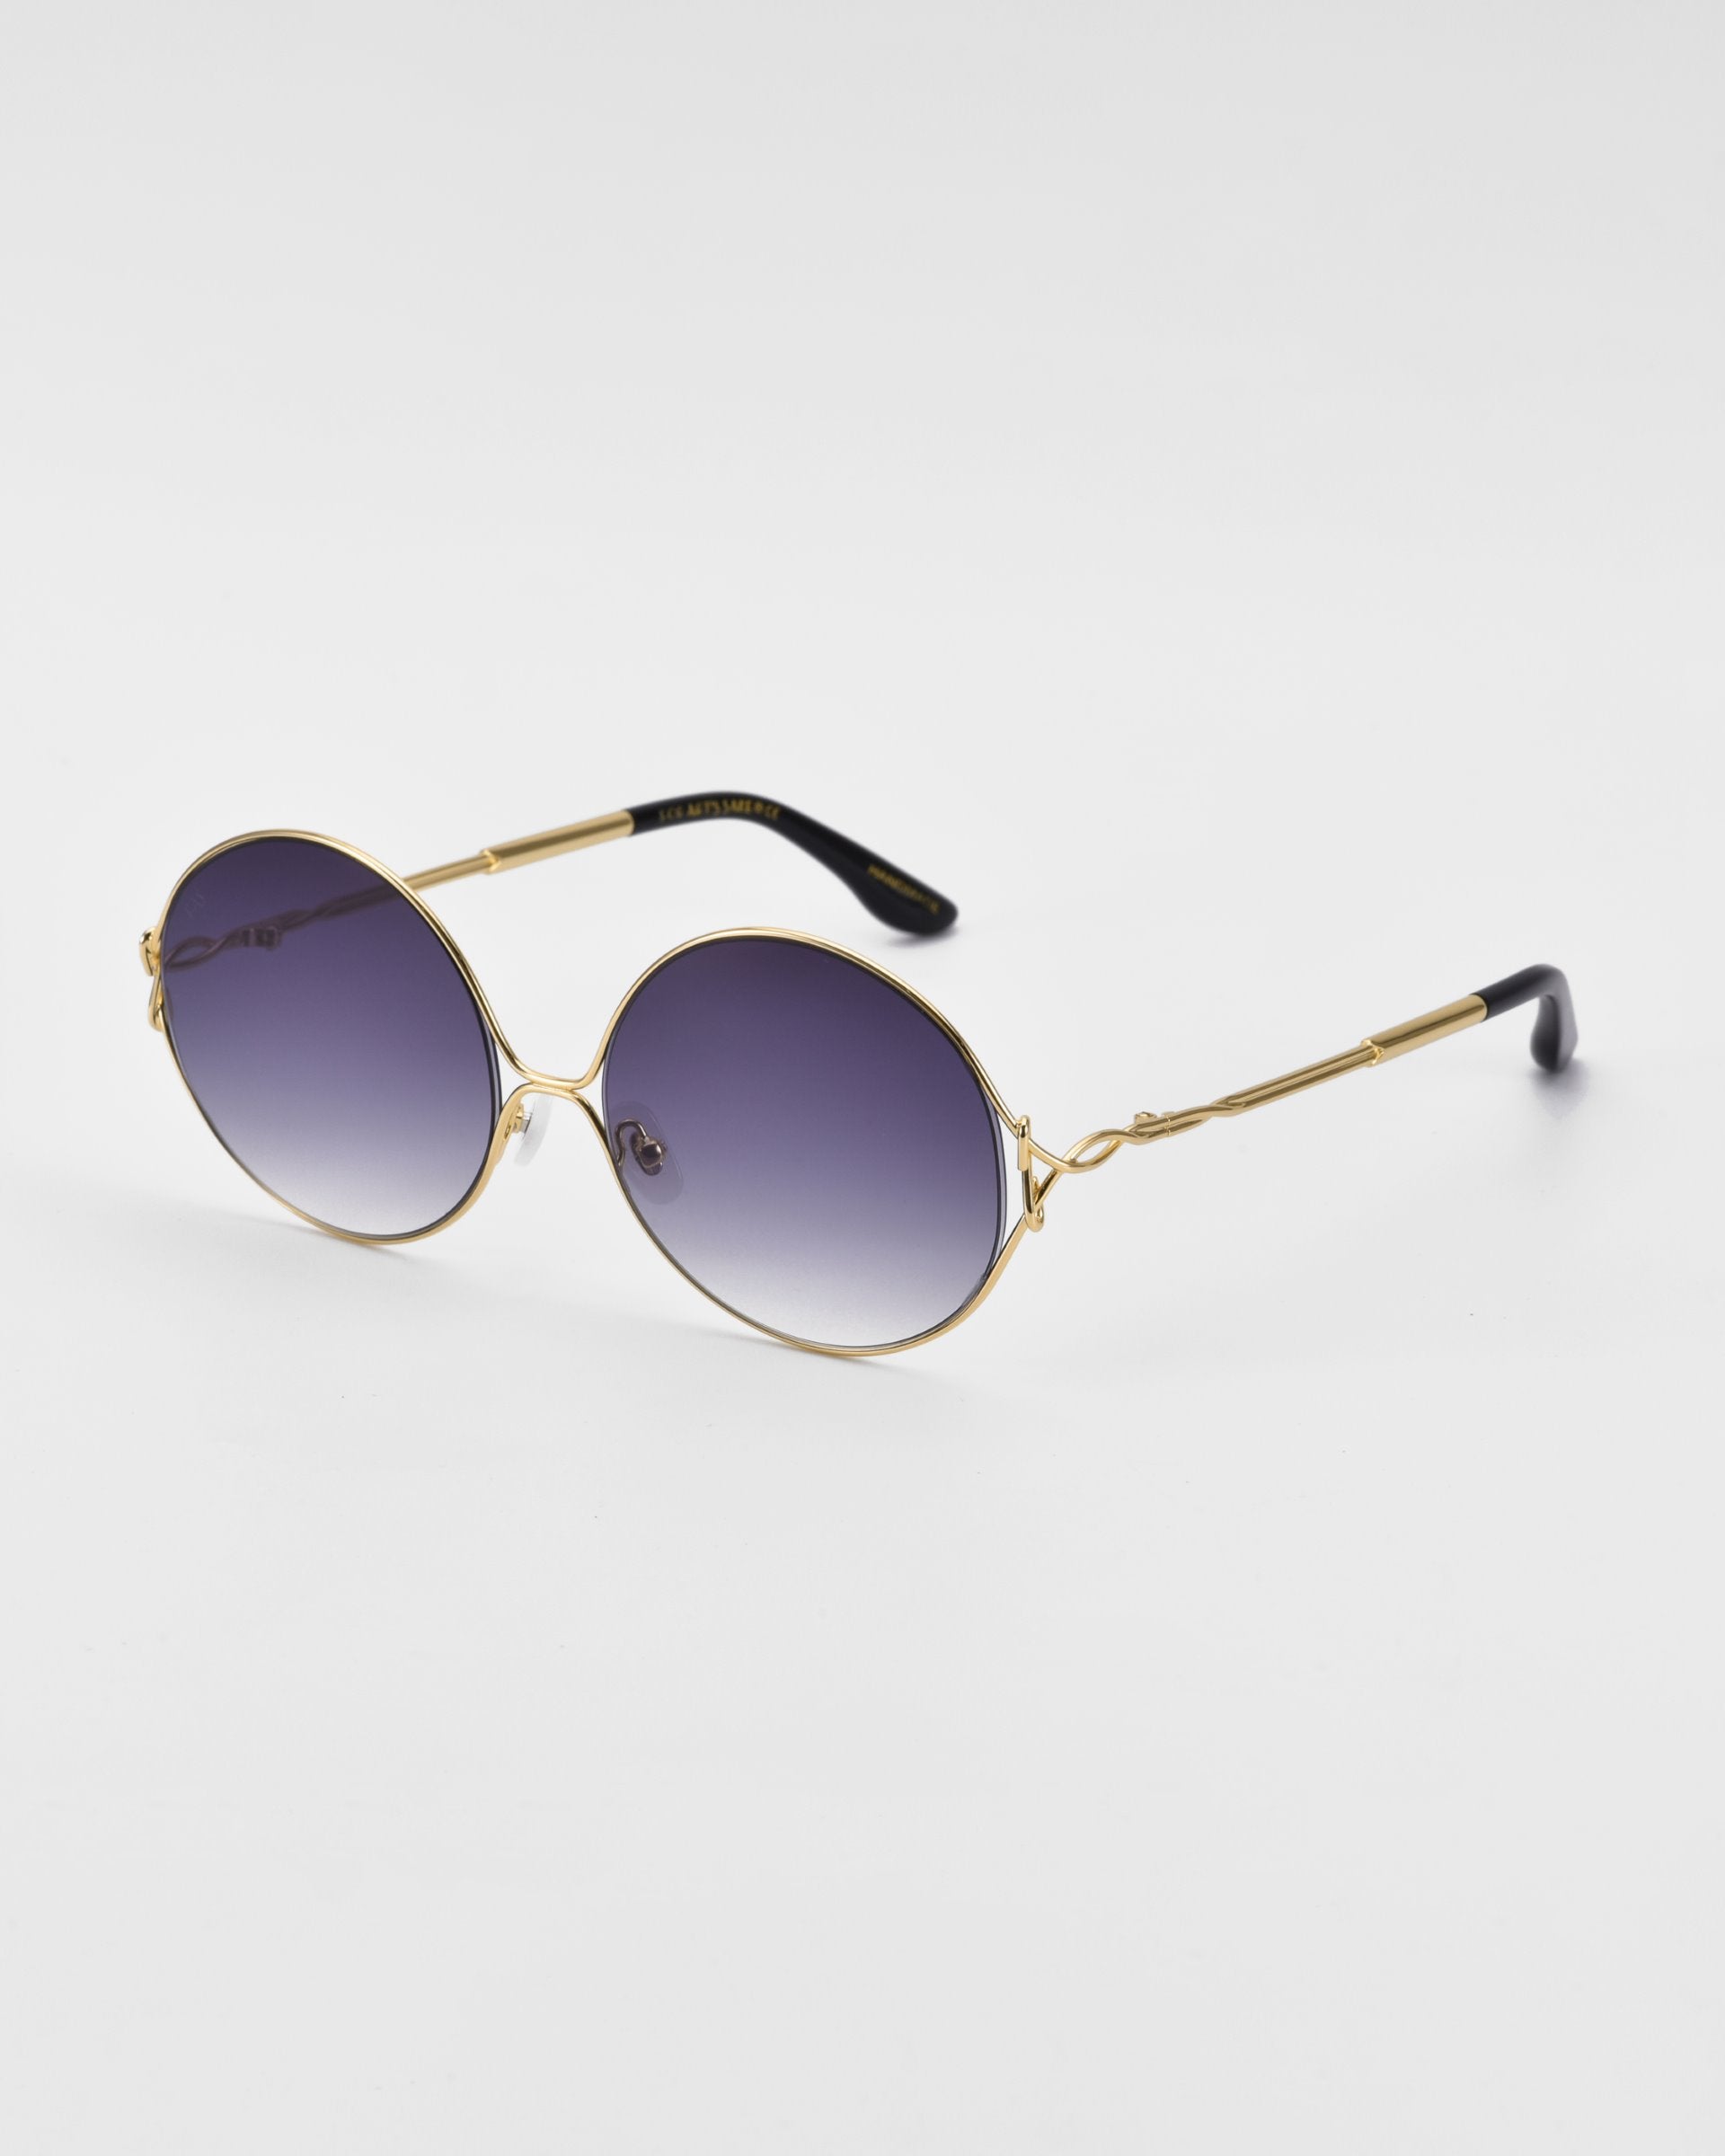 A pair of sleek, retro-inspired For Art's Sake® Aura sunglasses with gold-colored metal frames and gradient dark lenses are placed on a plain white background. The temples are thin with black tips, and the overall design is minimalist and stylish.